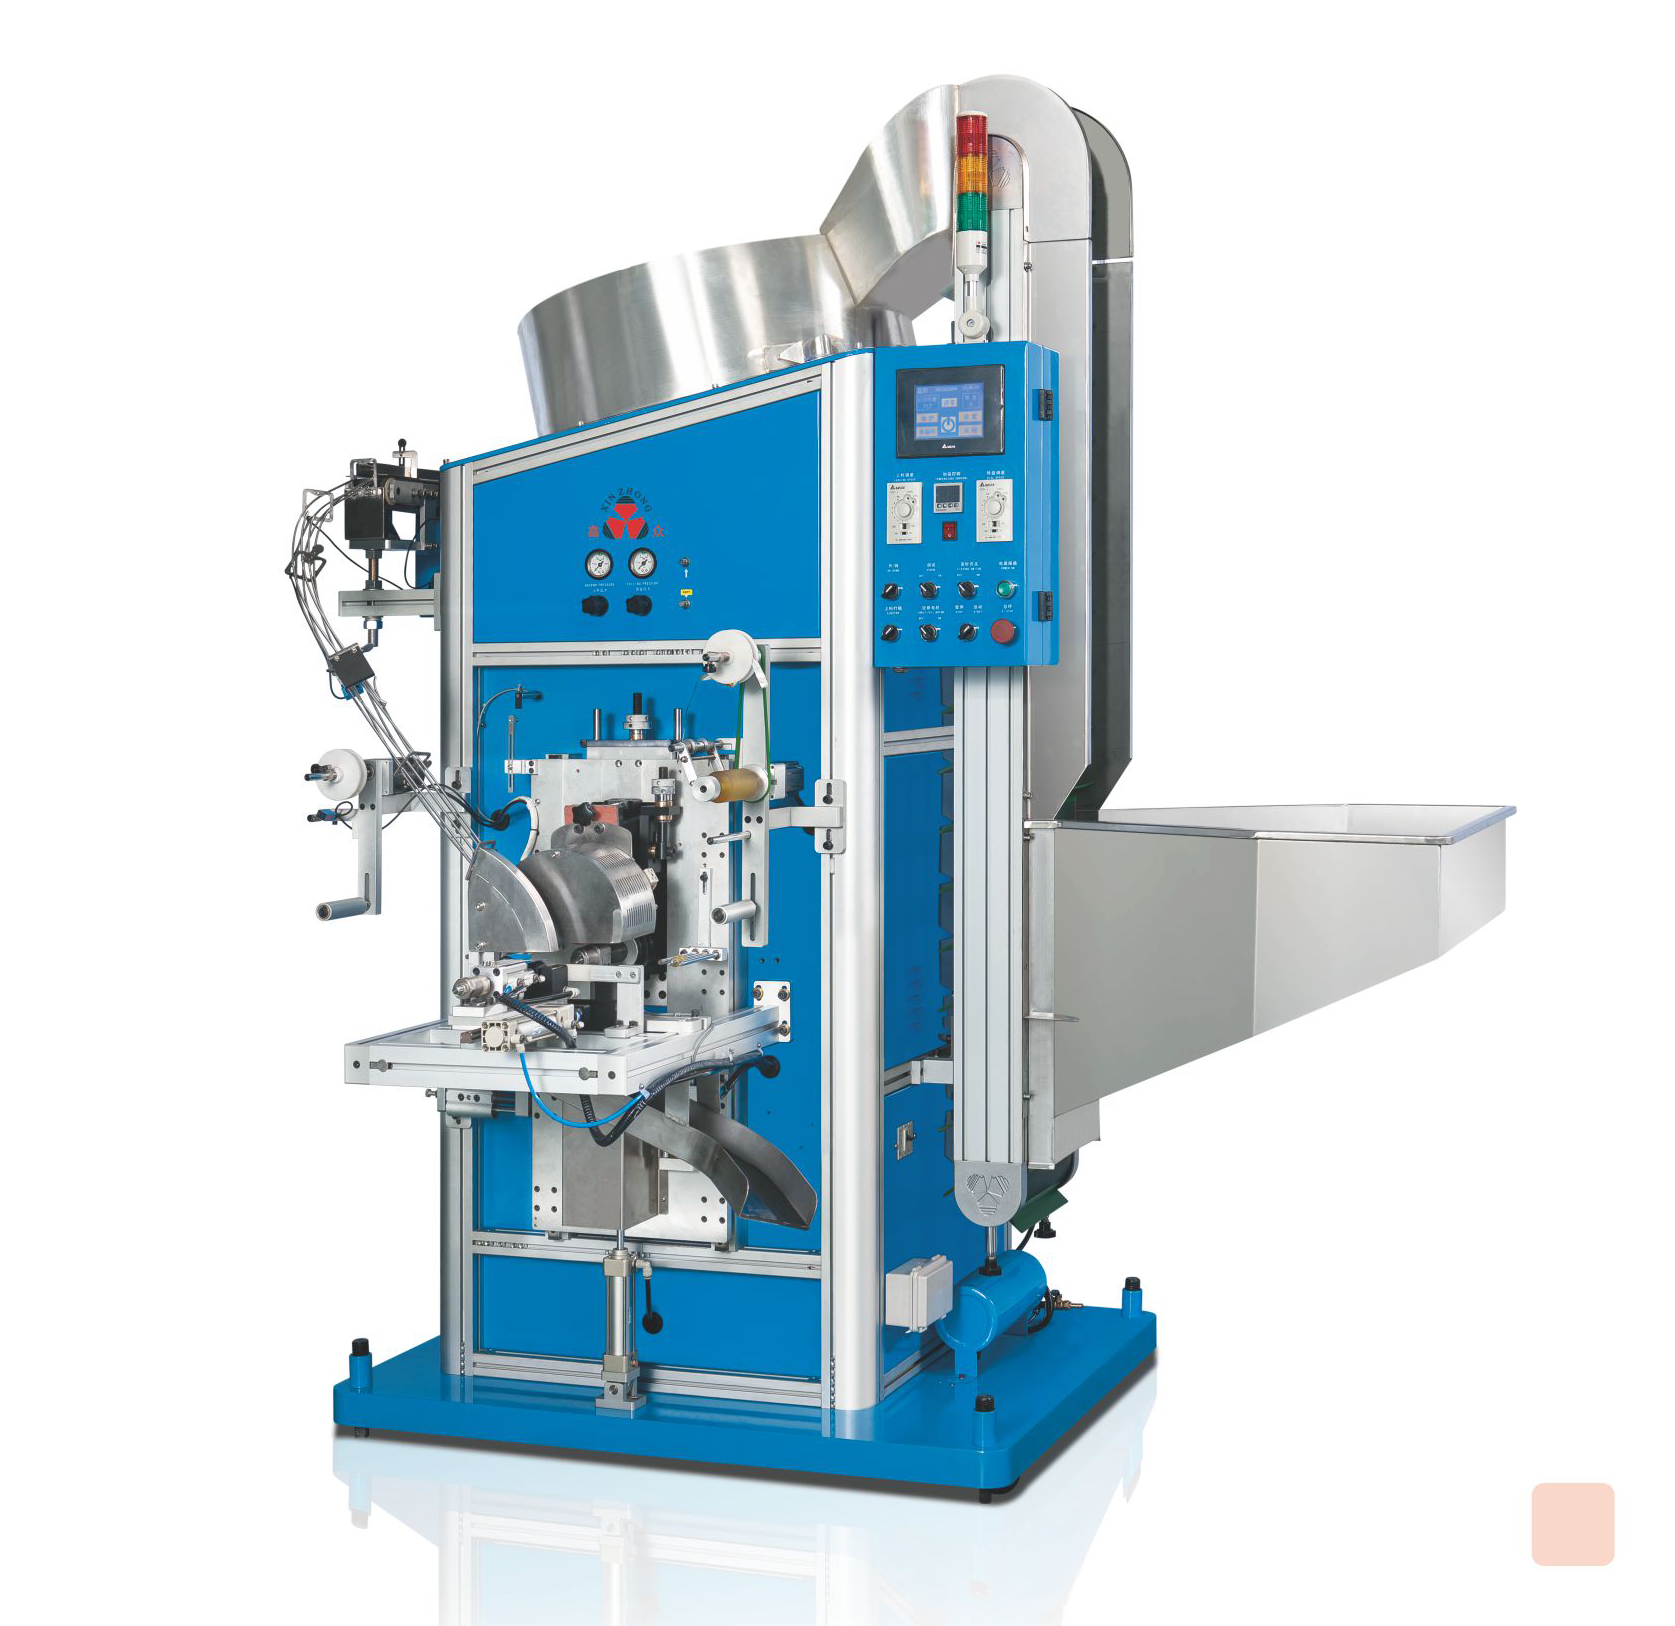 Fully auto hot staming machine for irregular shapes